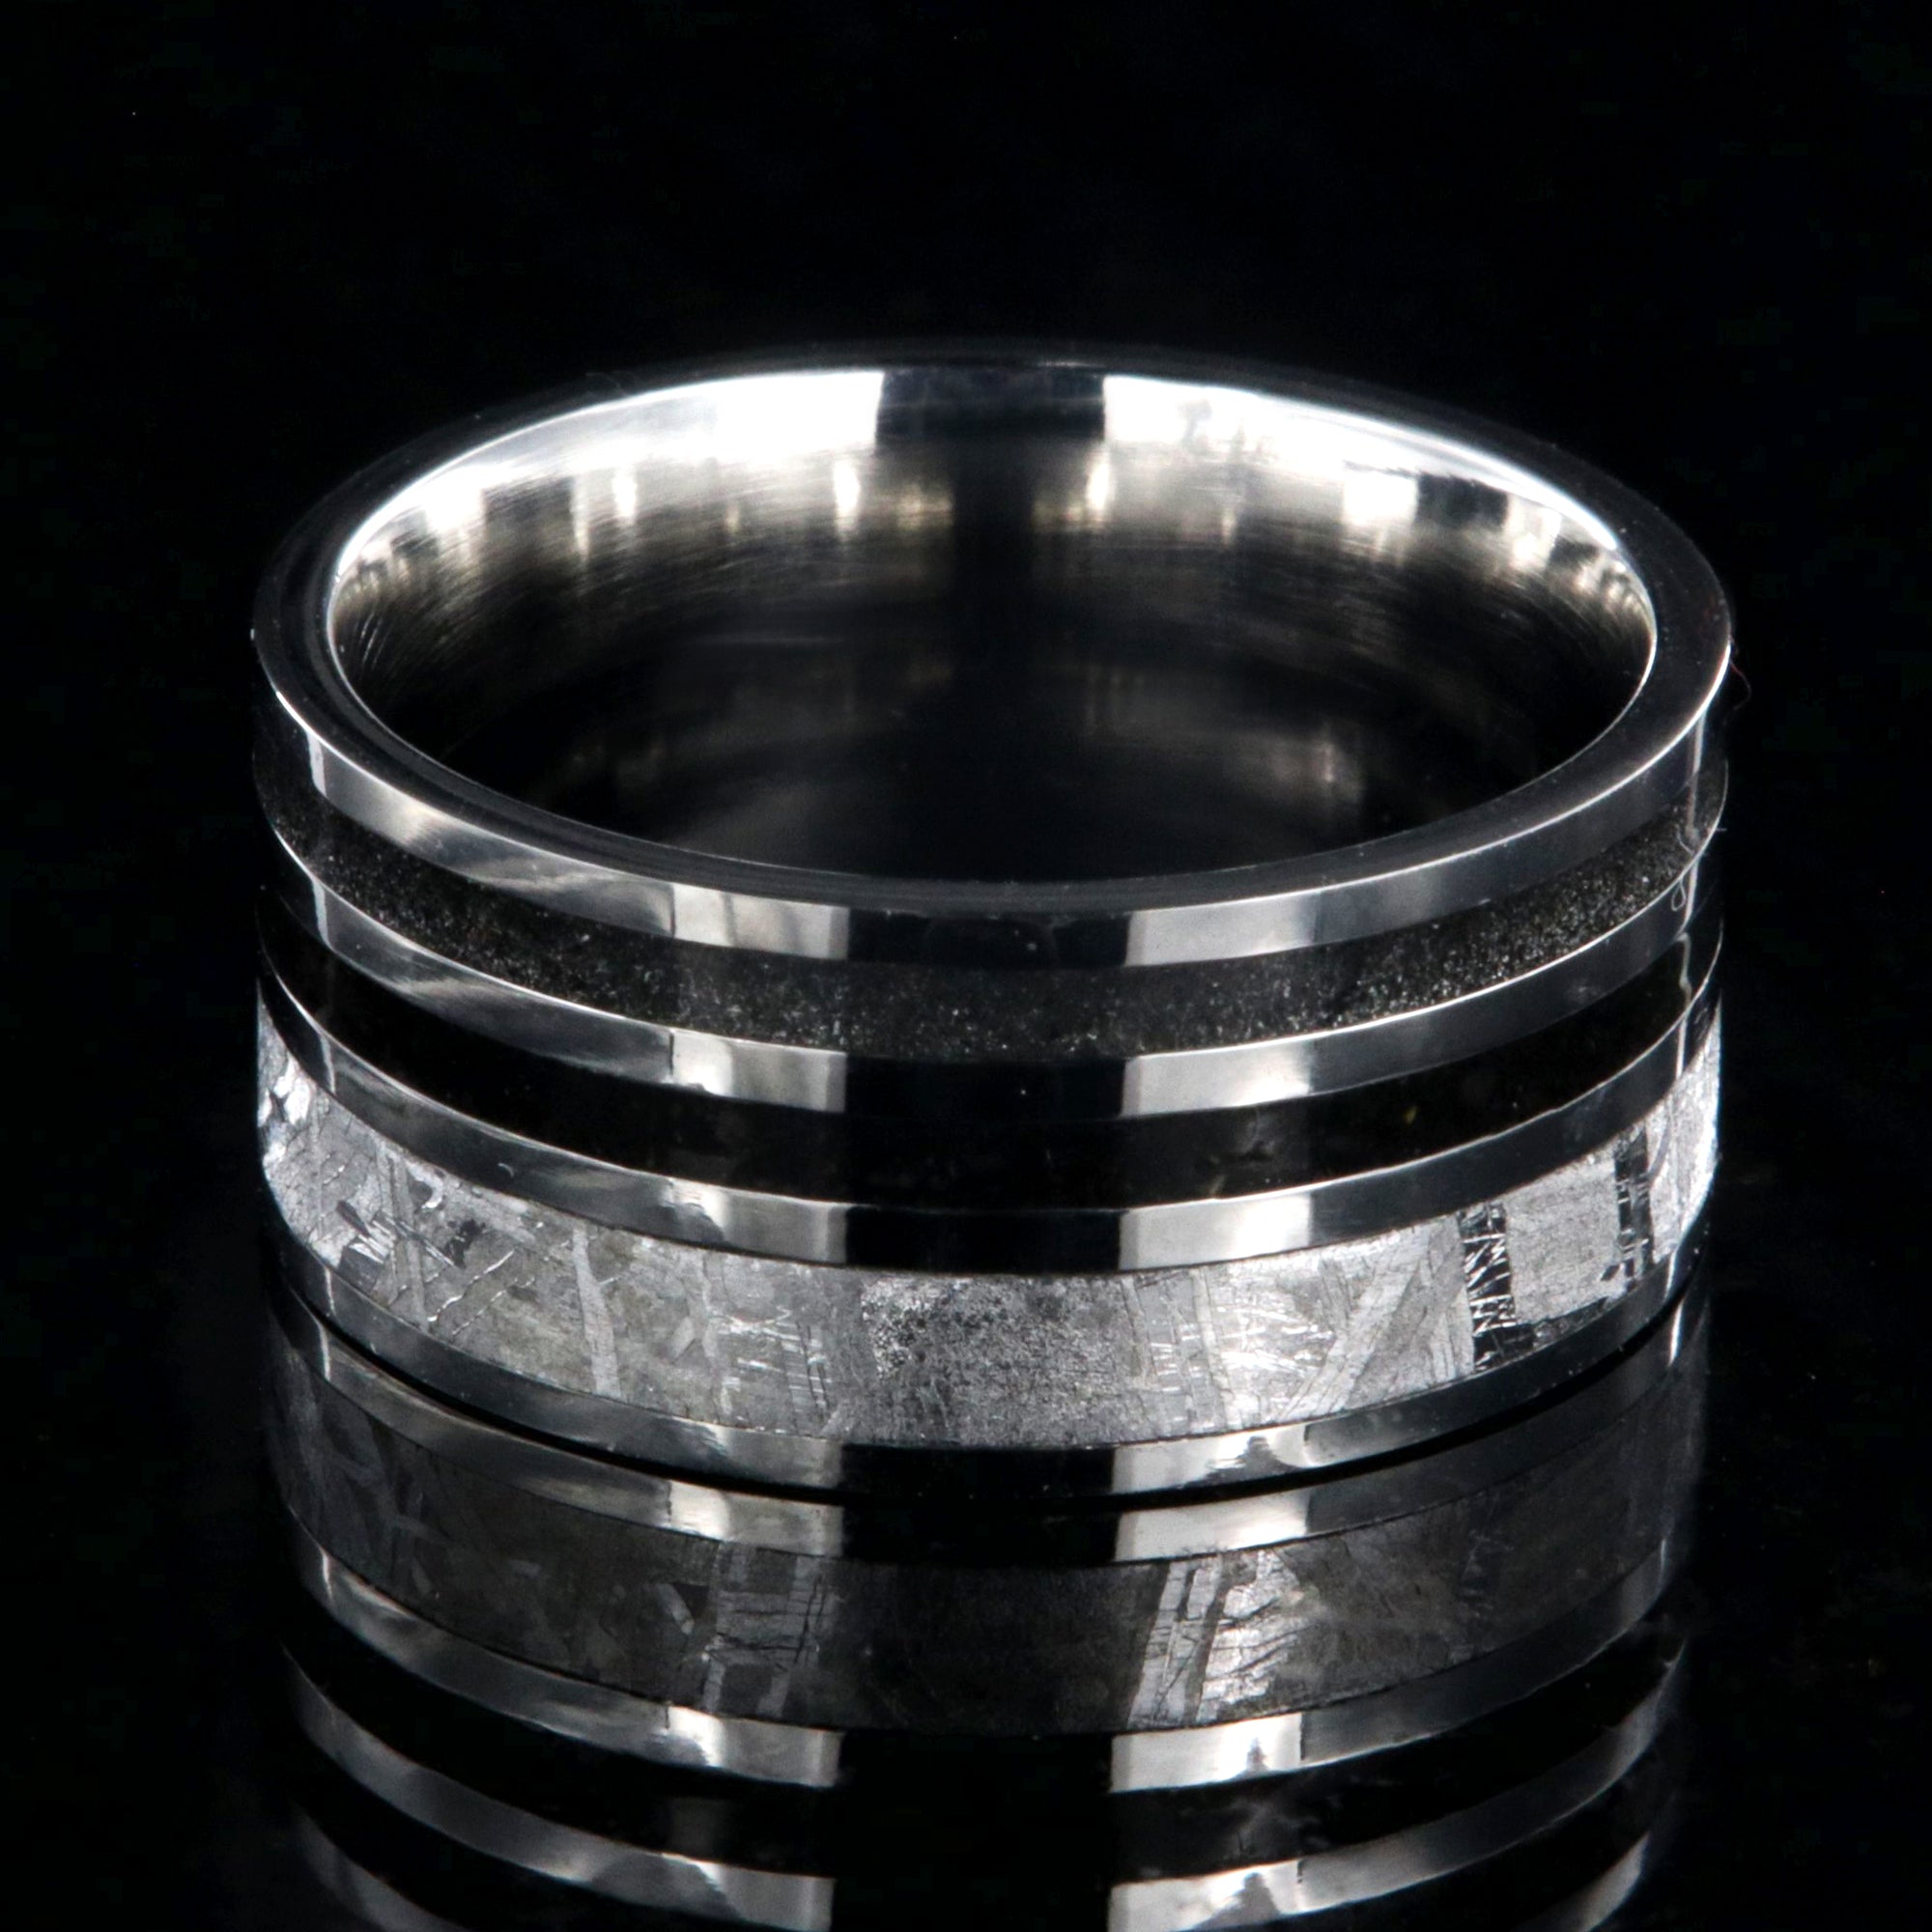 10mm wide meteorite ring with 3mm meteorite inly with 1.5mm dinosaur bone inlay, 1.5mm stardust inlay and cobalt sleeve